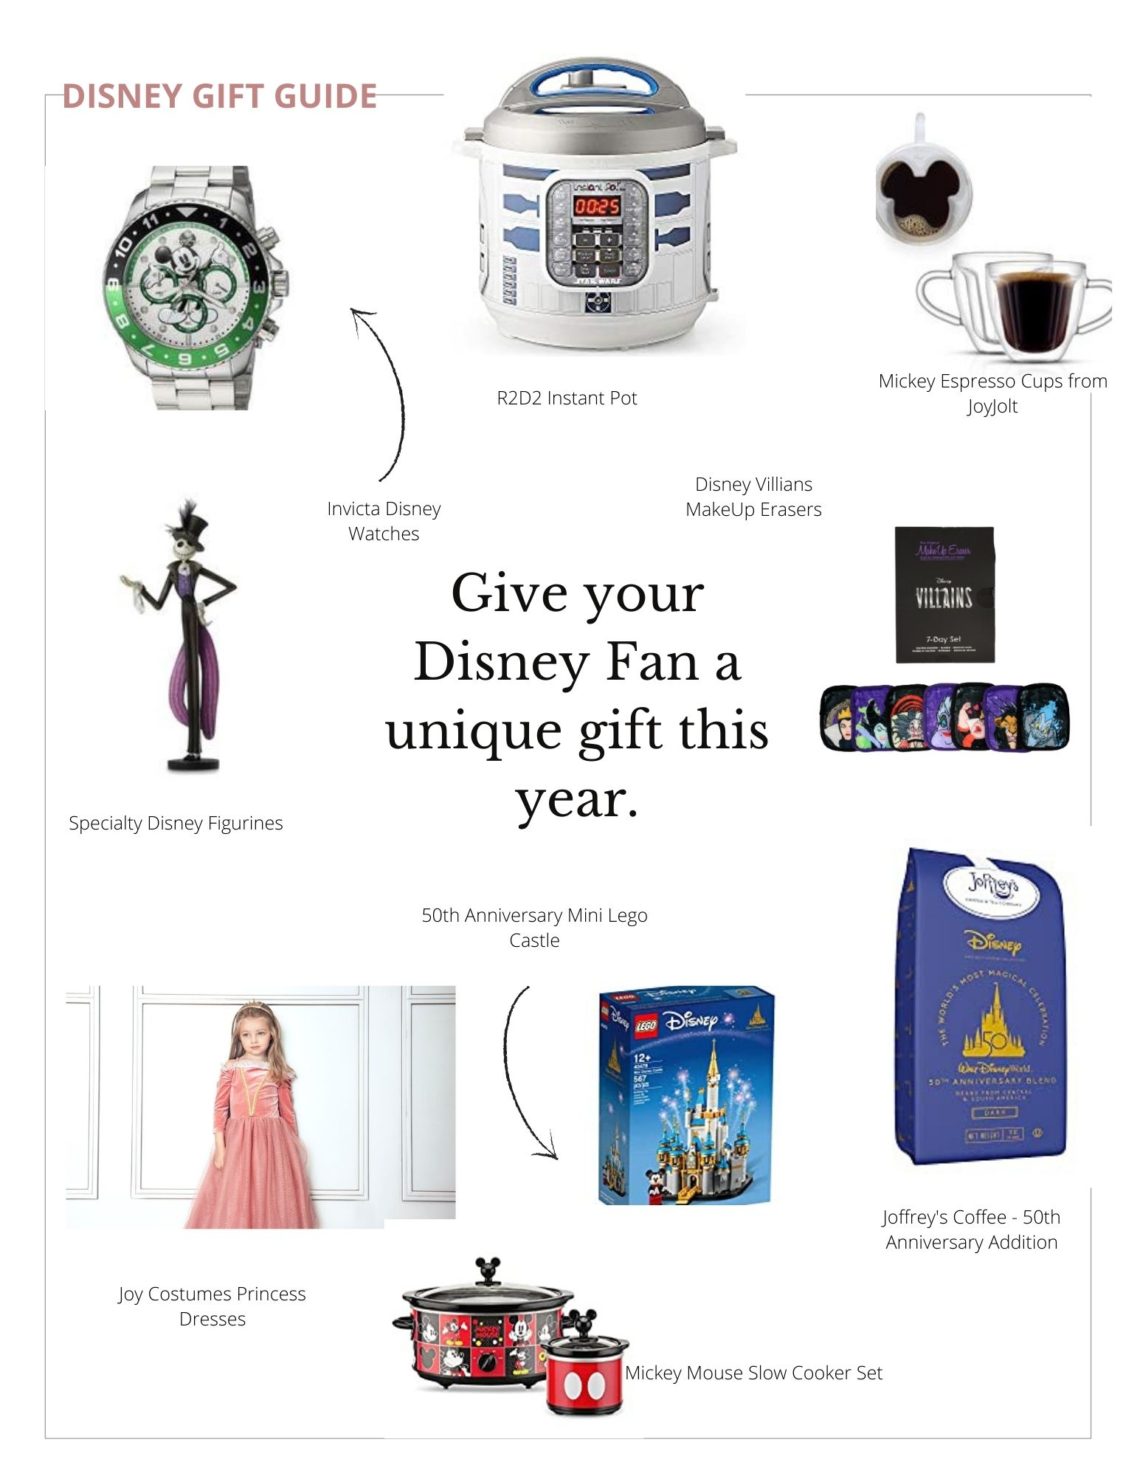 https://mommysmoviemagic.com/wp-content/uploads/2021/11/Copy-of-NS-Gift-Guide-Full-Size-1-1140x1476.jpg